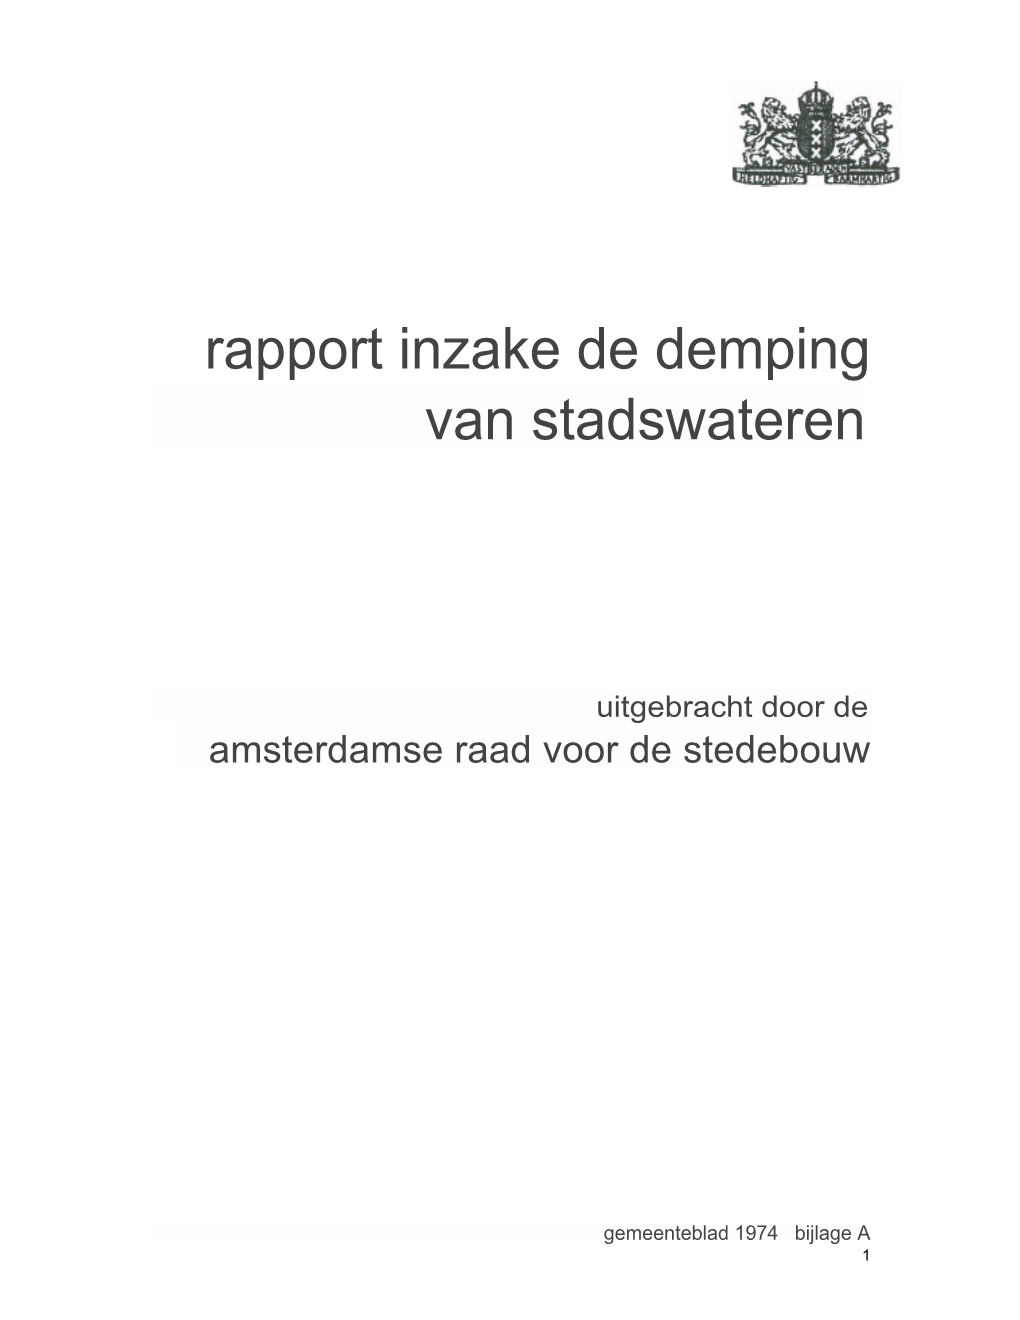 ARS-Rapport 1974